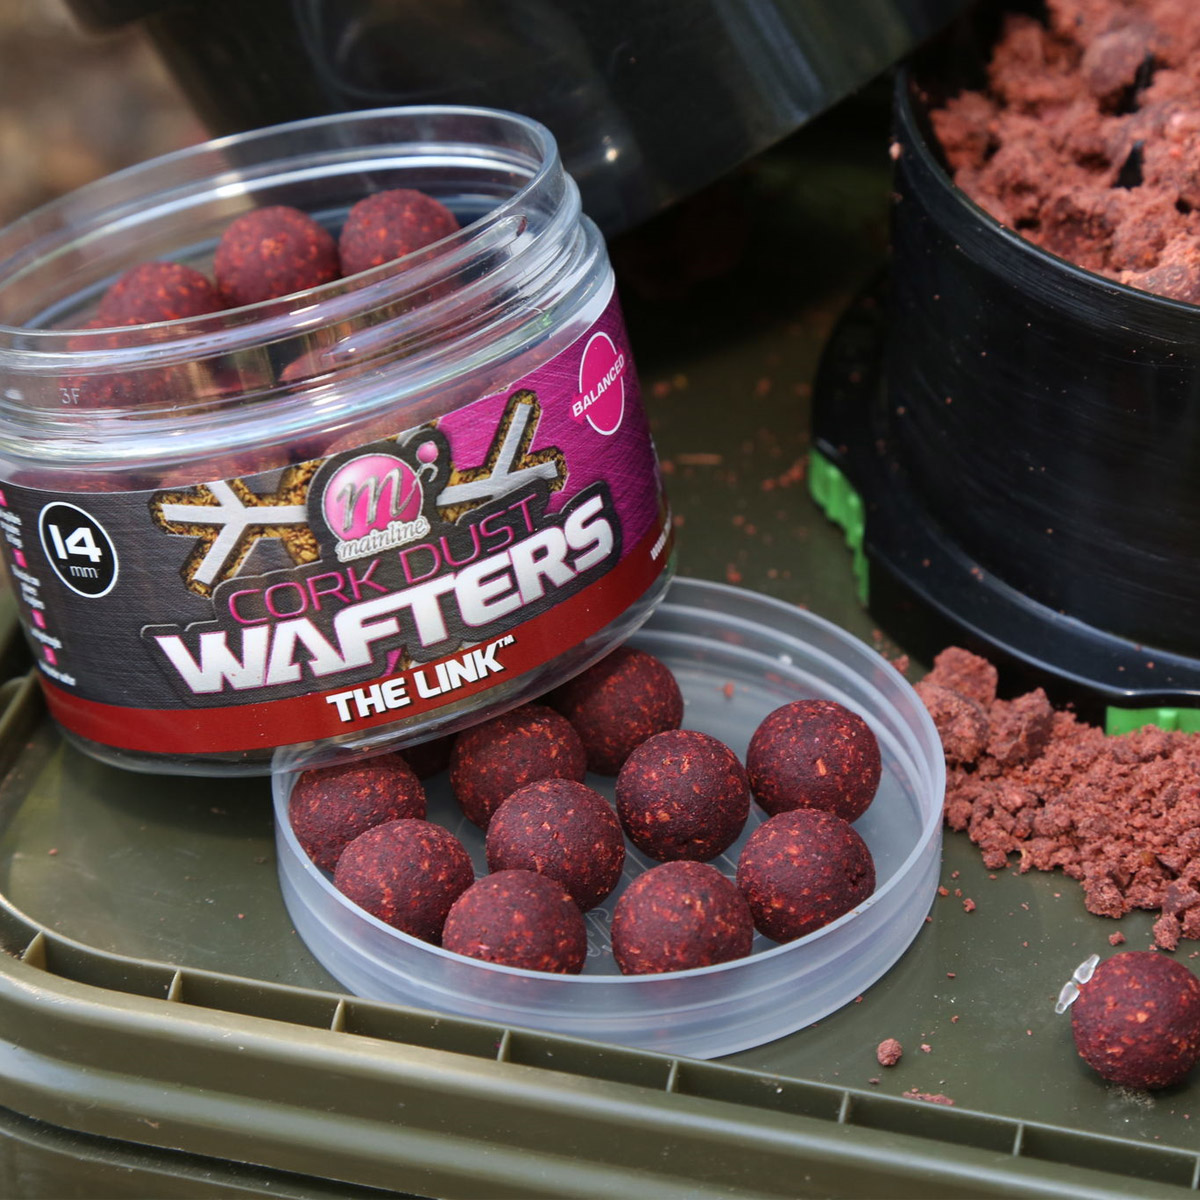 Mainline Cork Dust Wafters The Link 14 MM